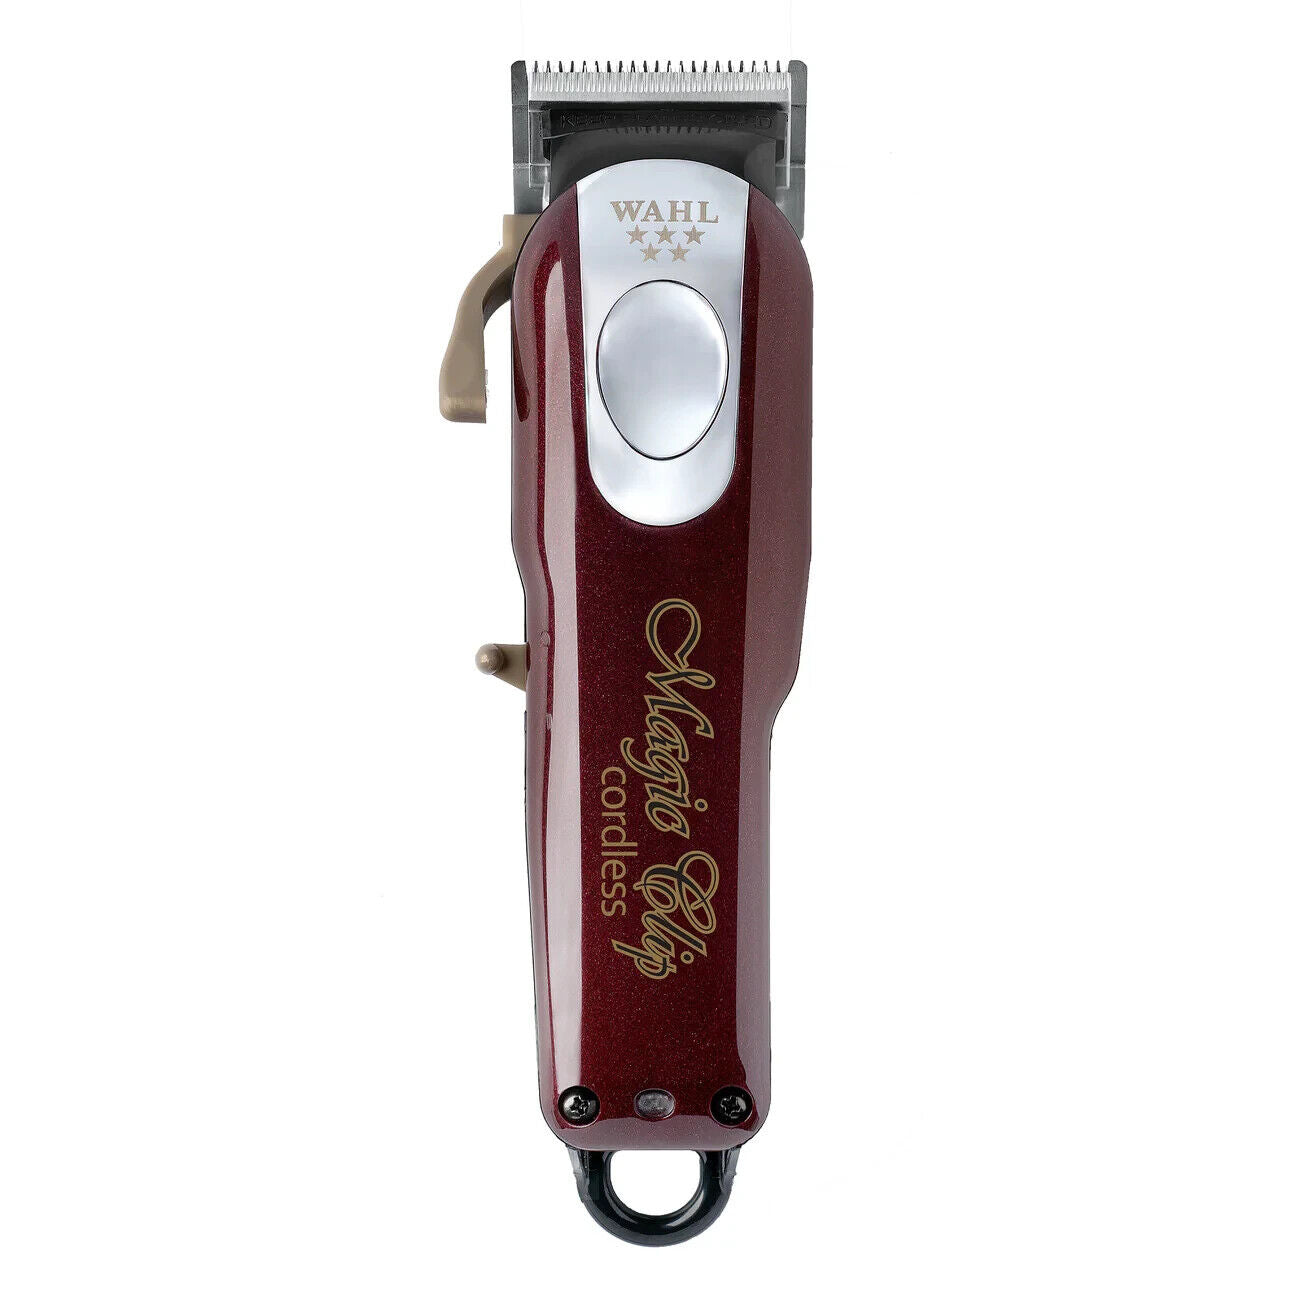 Wahl Cordless Magic Clip Clipper + BaByliss Gold Skeleton Trimmer COMBO